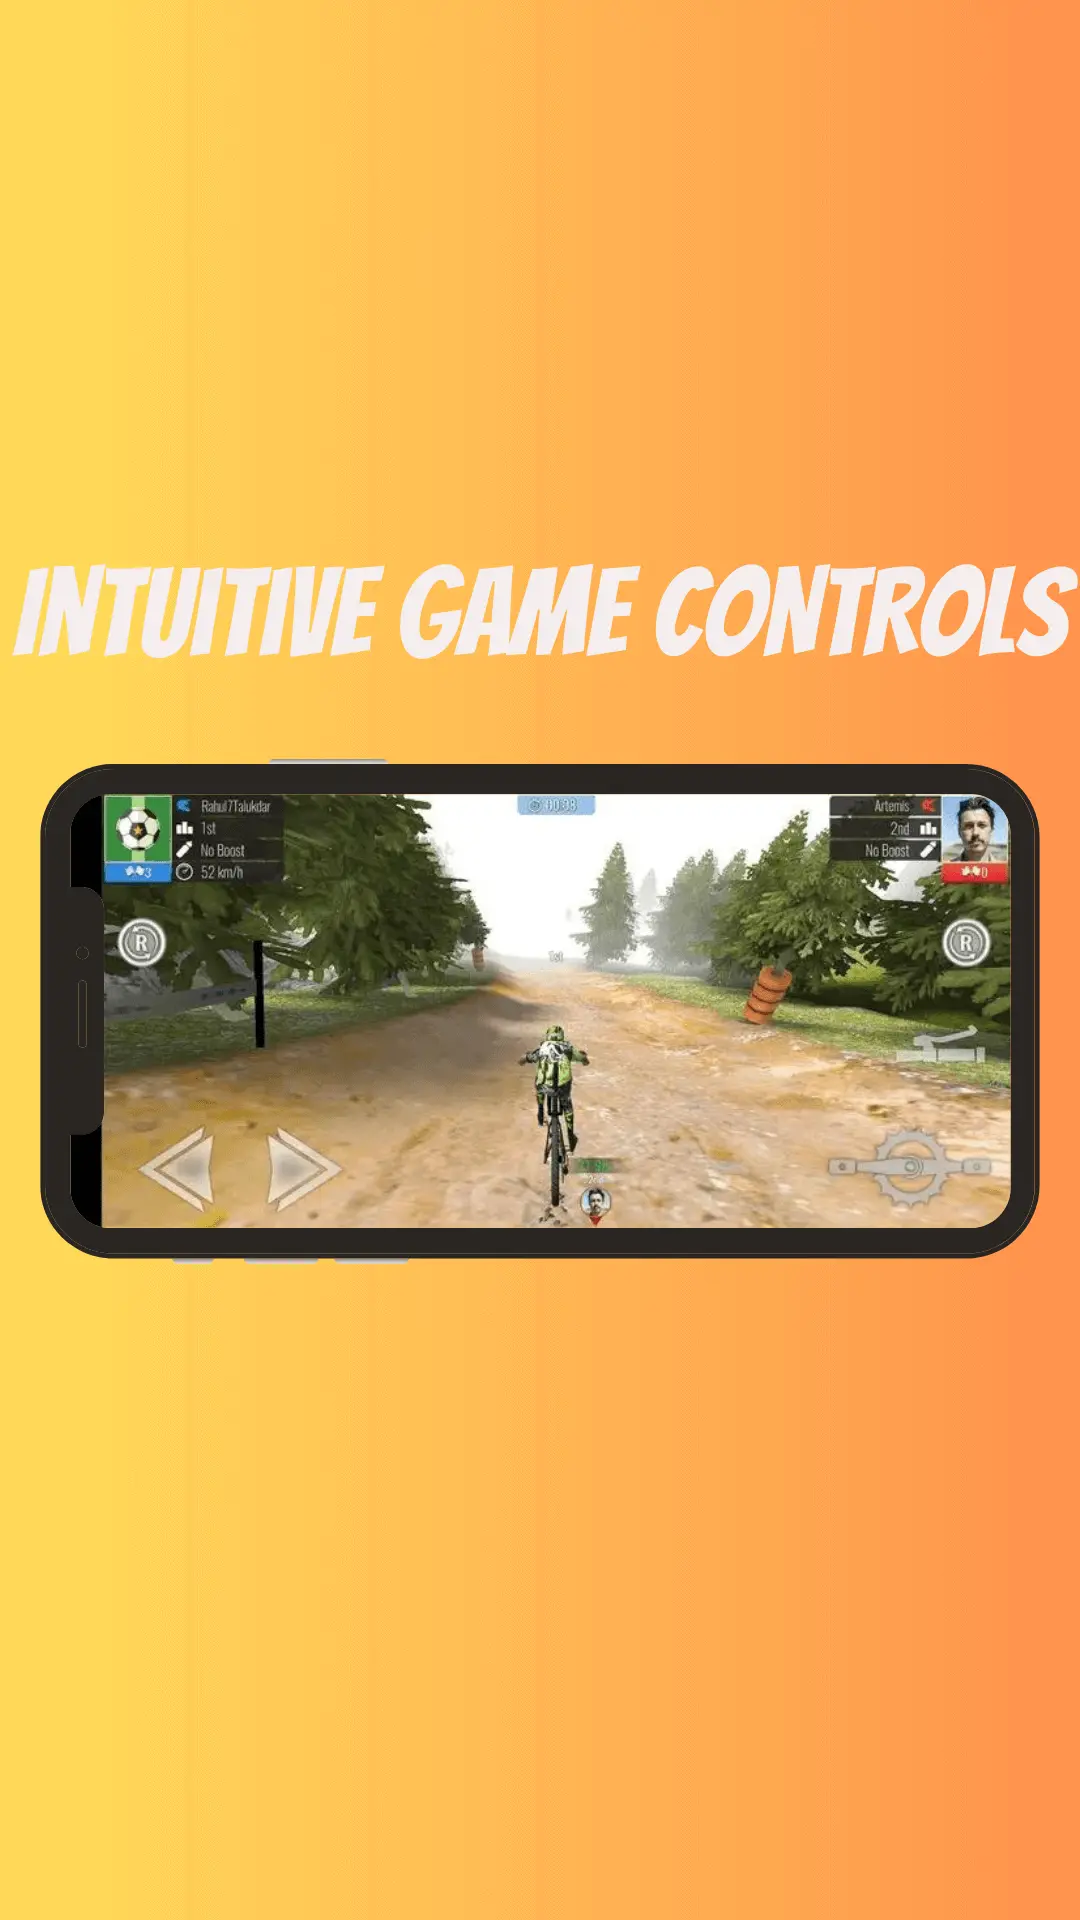 INTUITIVE GAME CONTROLS